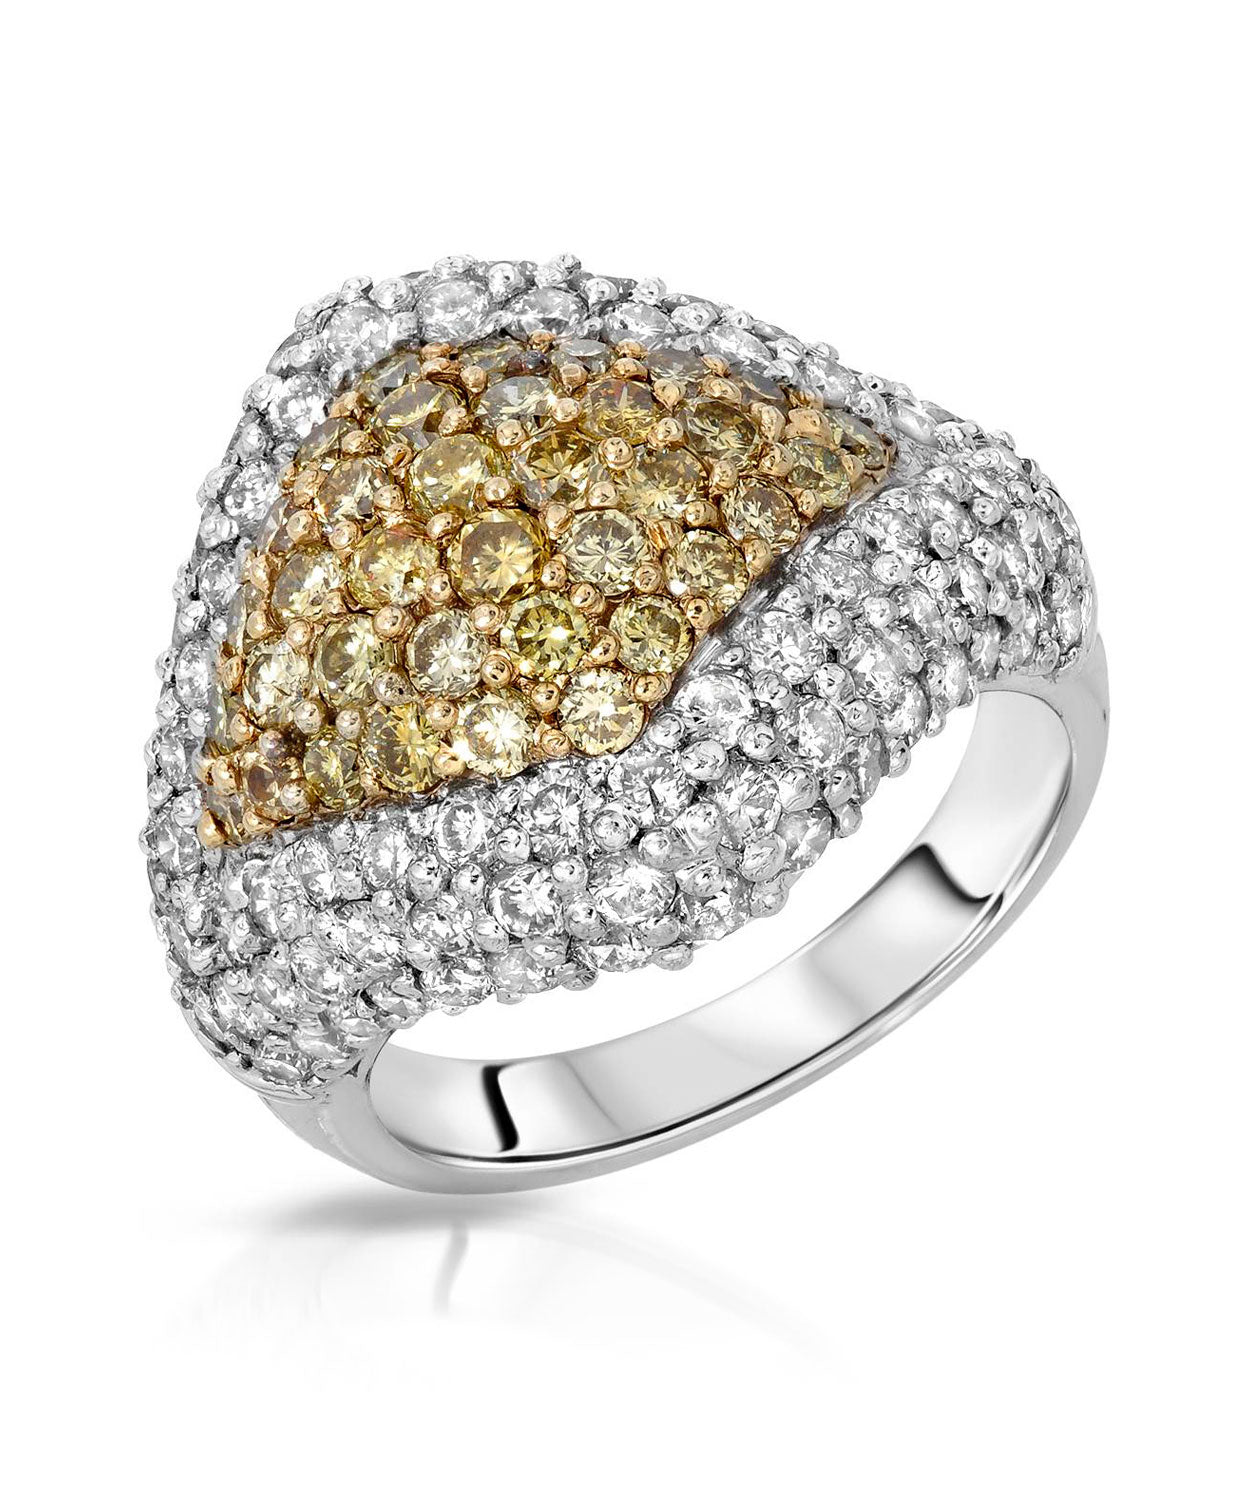 Glamour Toujours Collection 3.51 ctw Fancy Yellow and White Diamond 14k Gold Right Hand Ring View 1